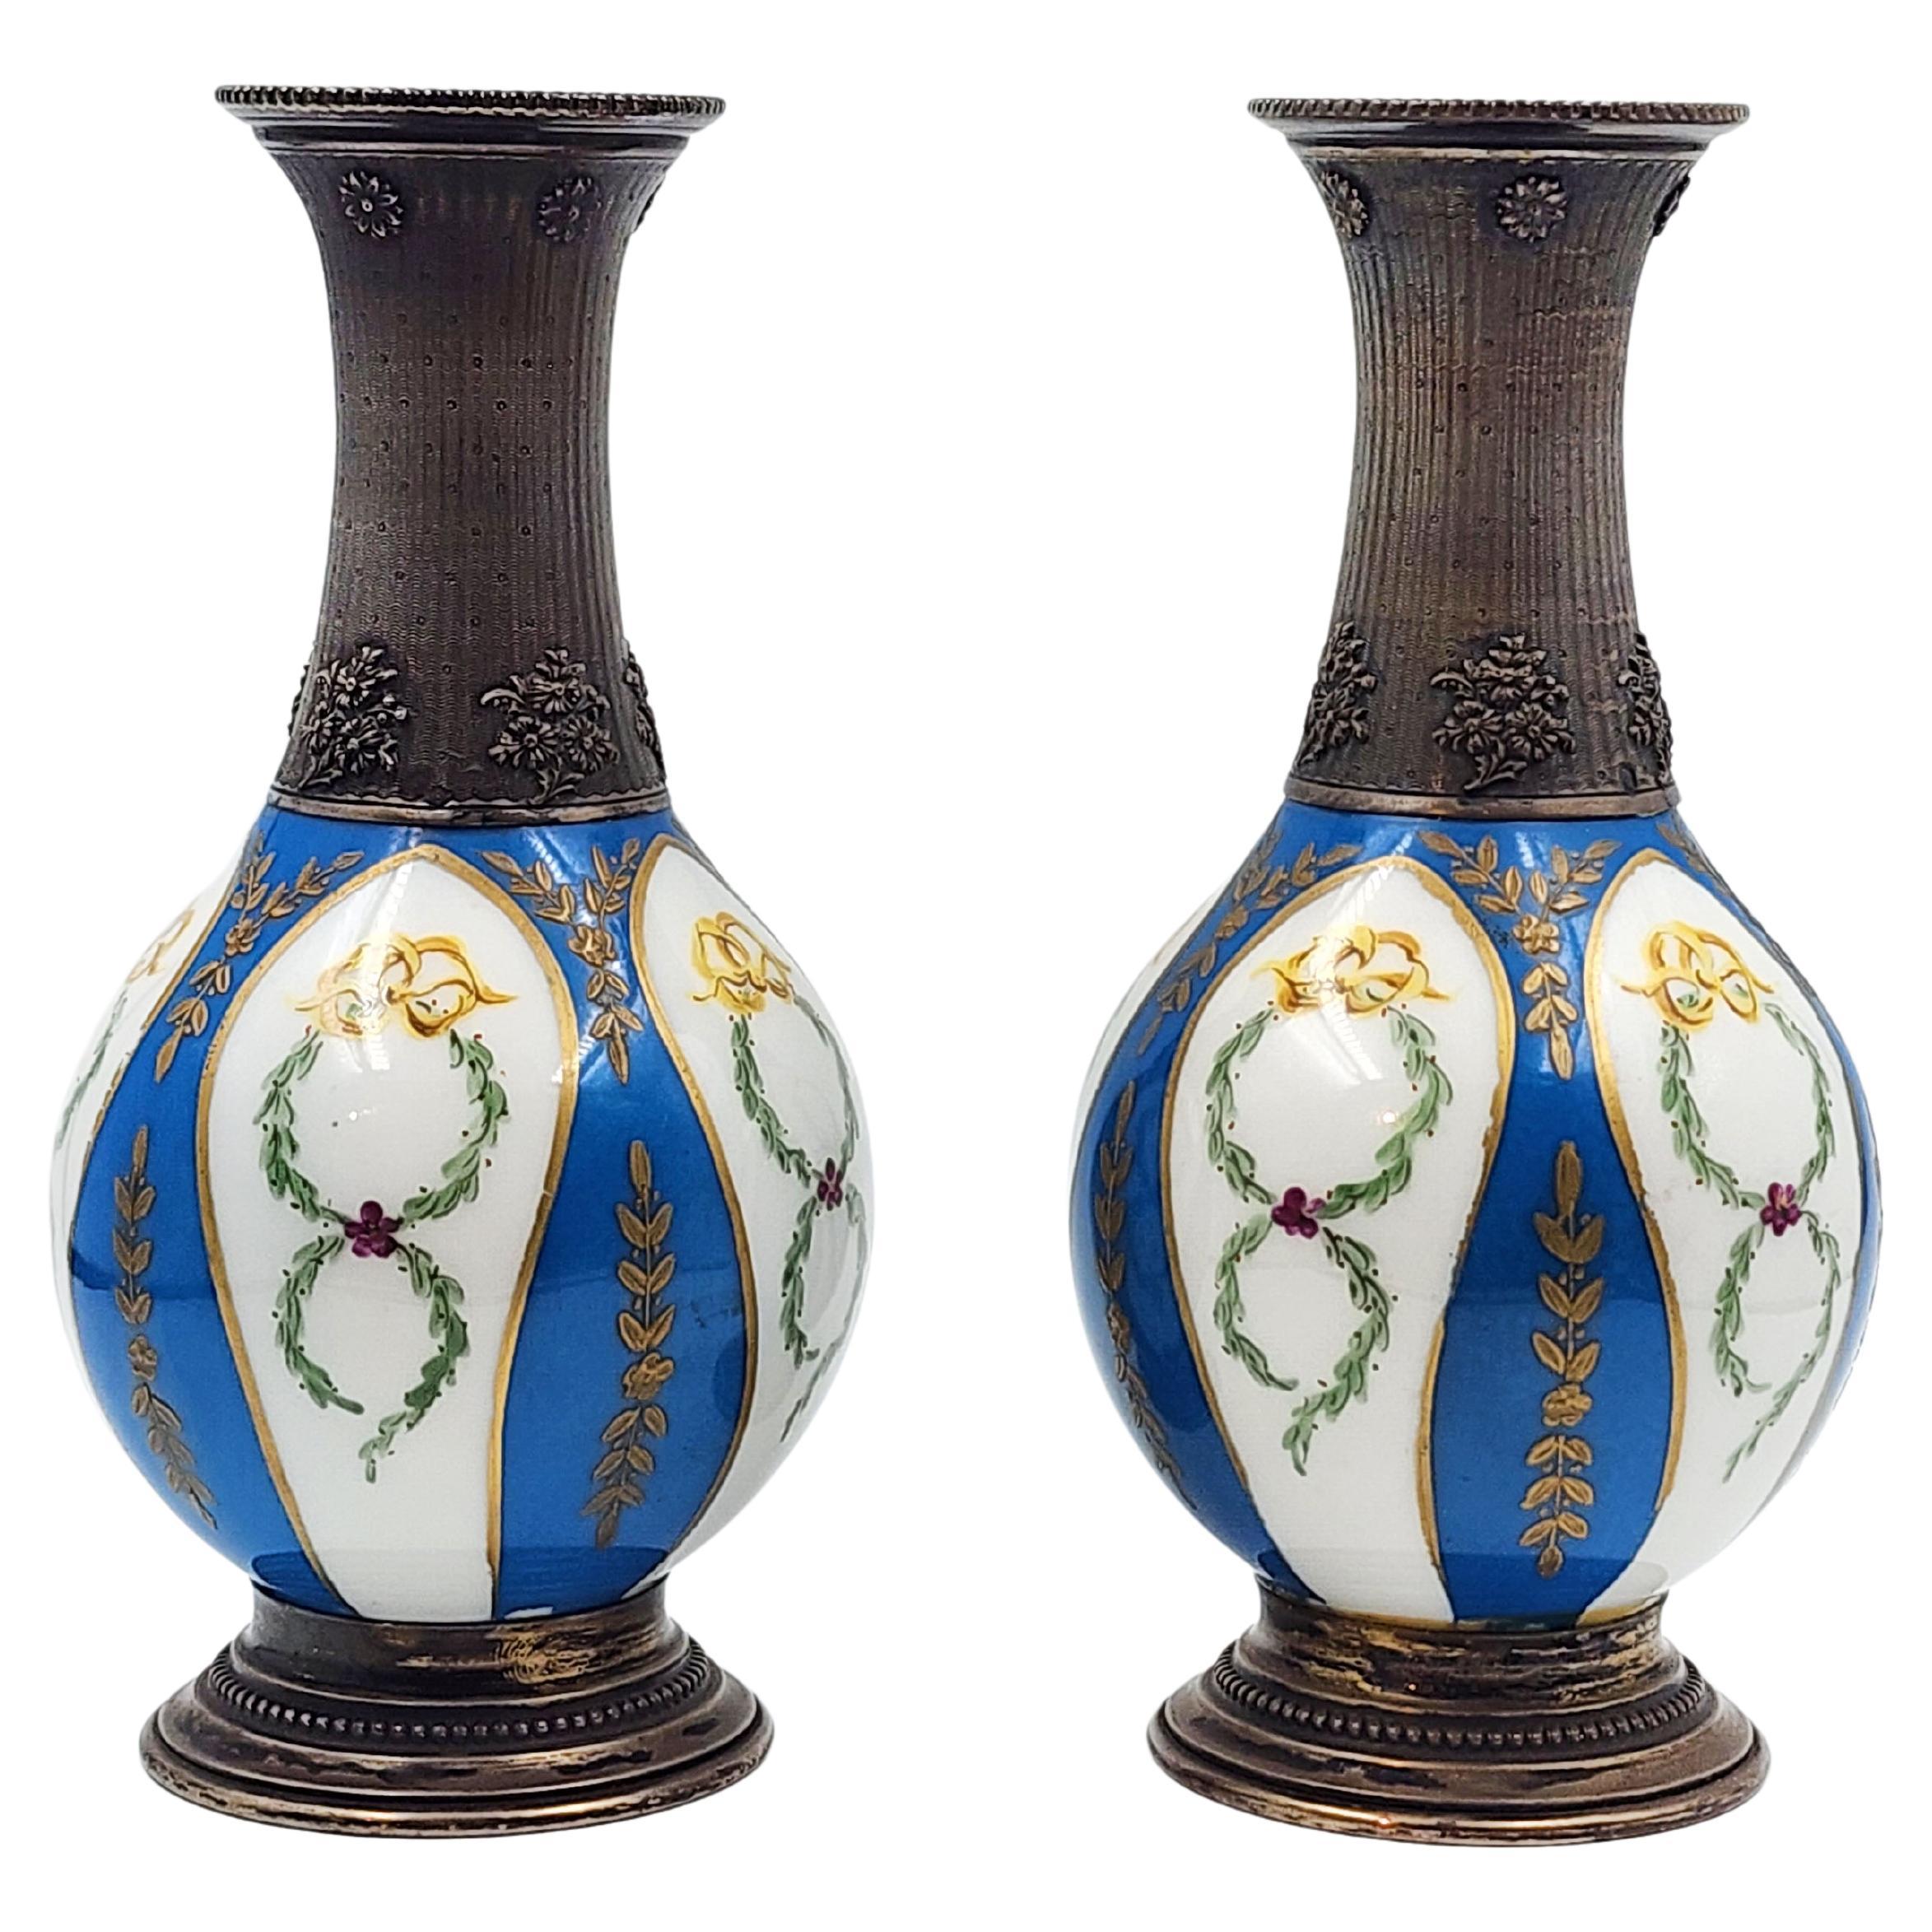 Pair of silver and porcelain sevres vases, 19th century